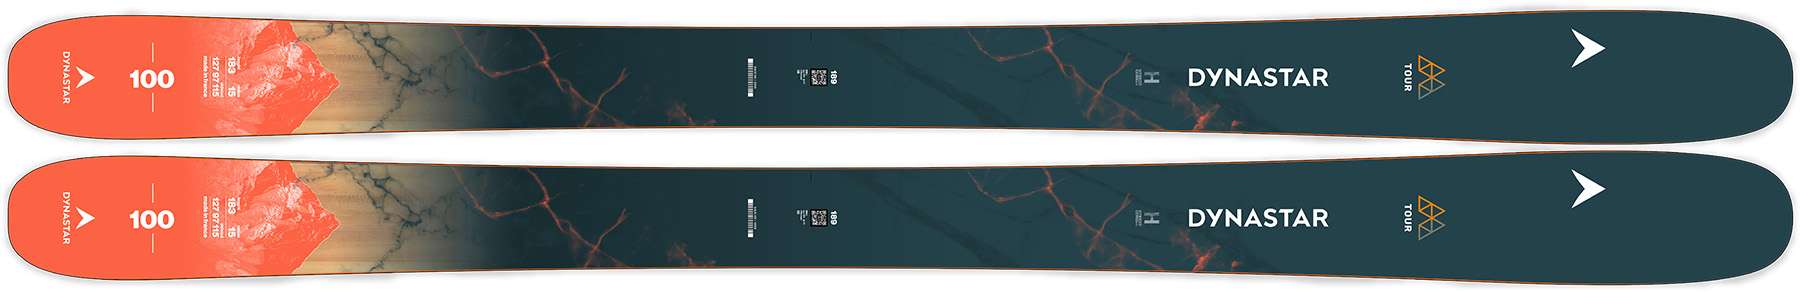 2024-2025 Dynastar Skis, Lange Ski Boots, and Look Bindings | Blister discusses all the new products